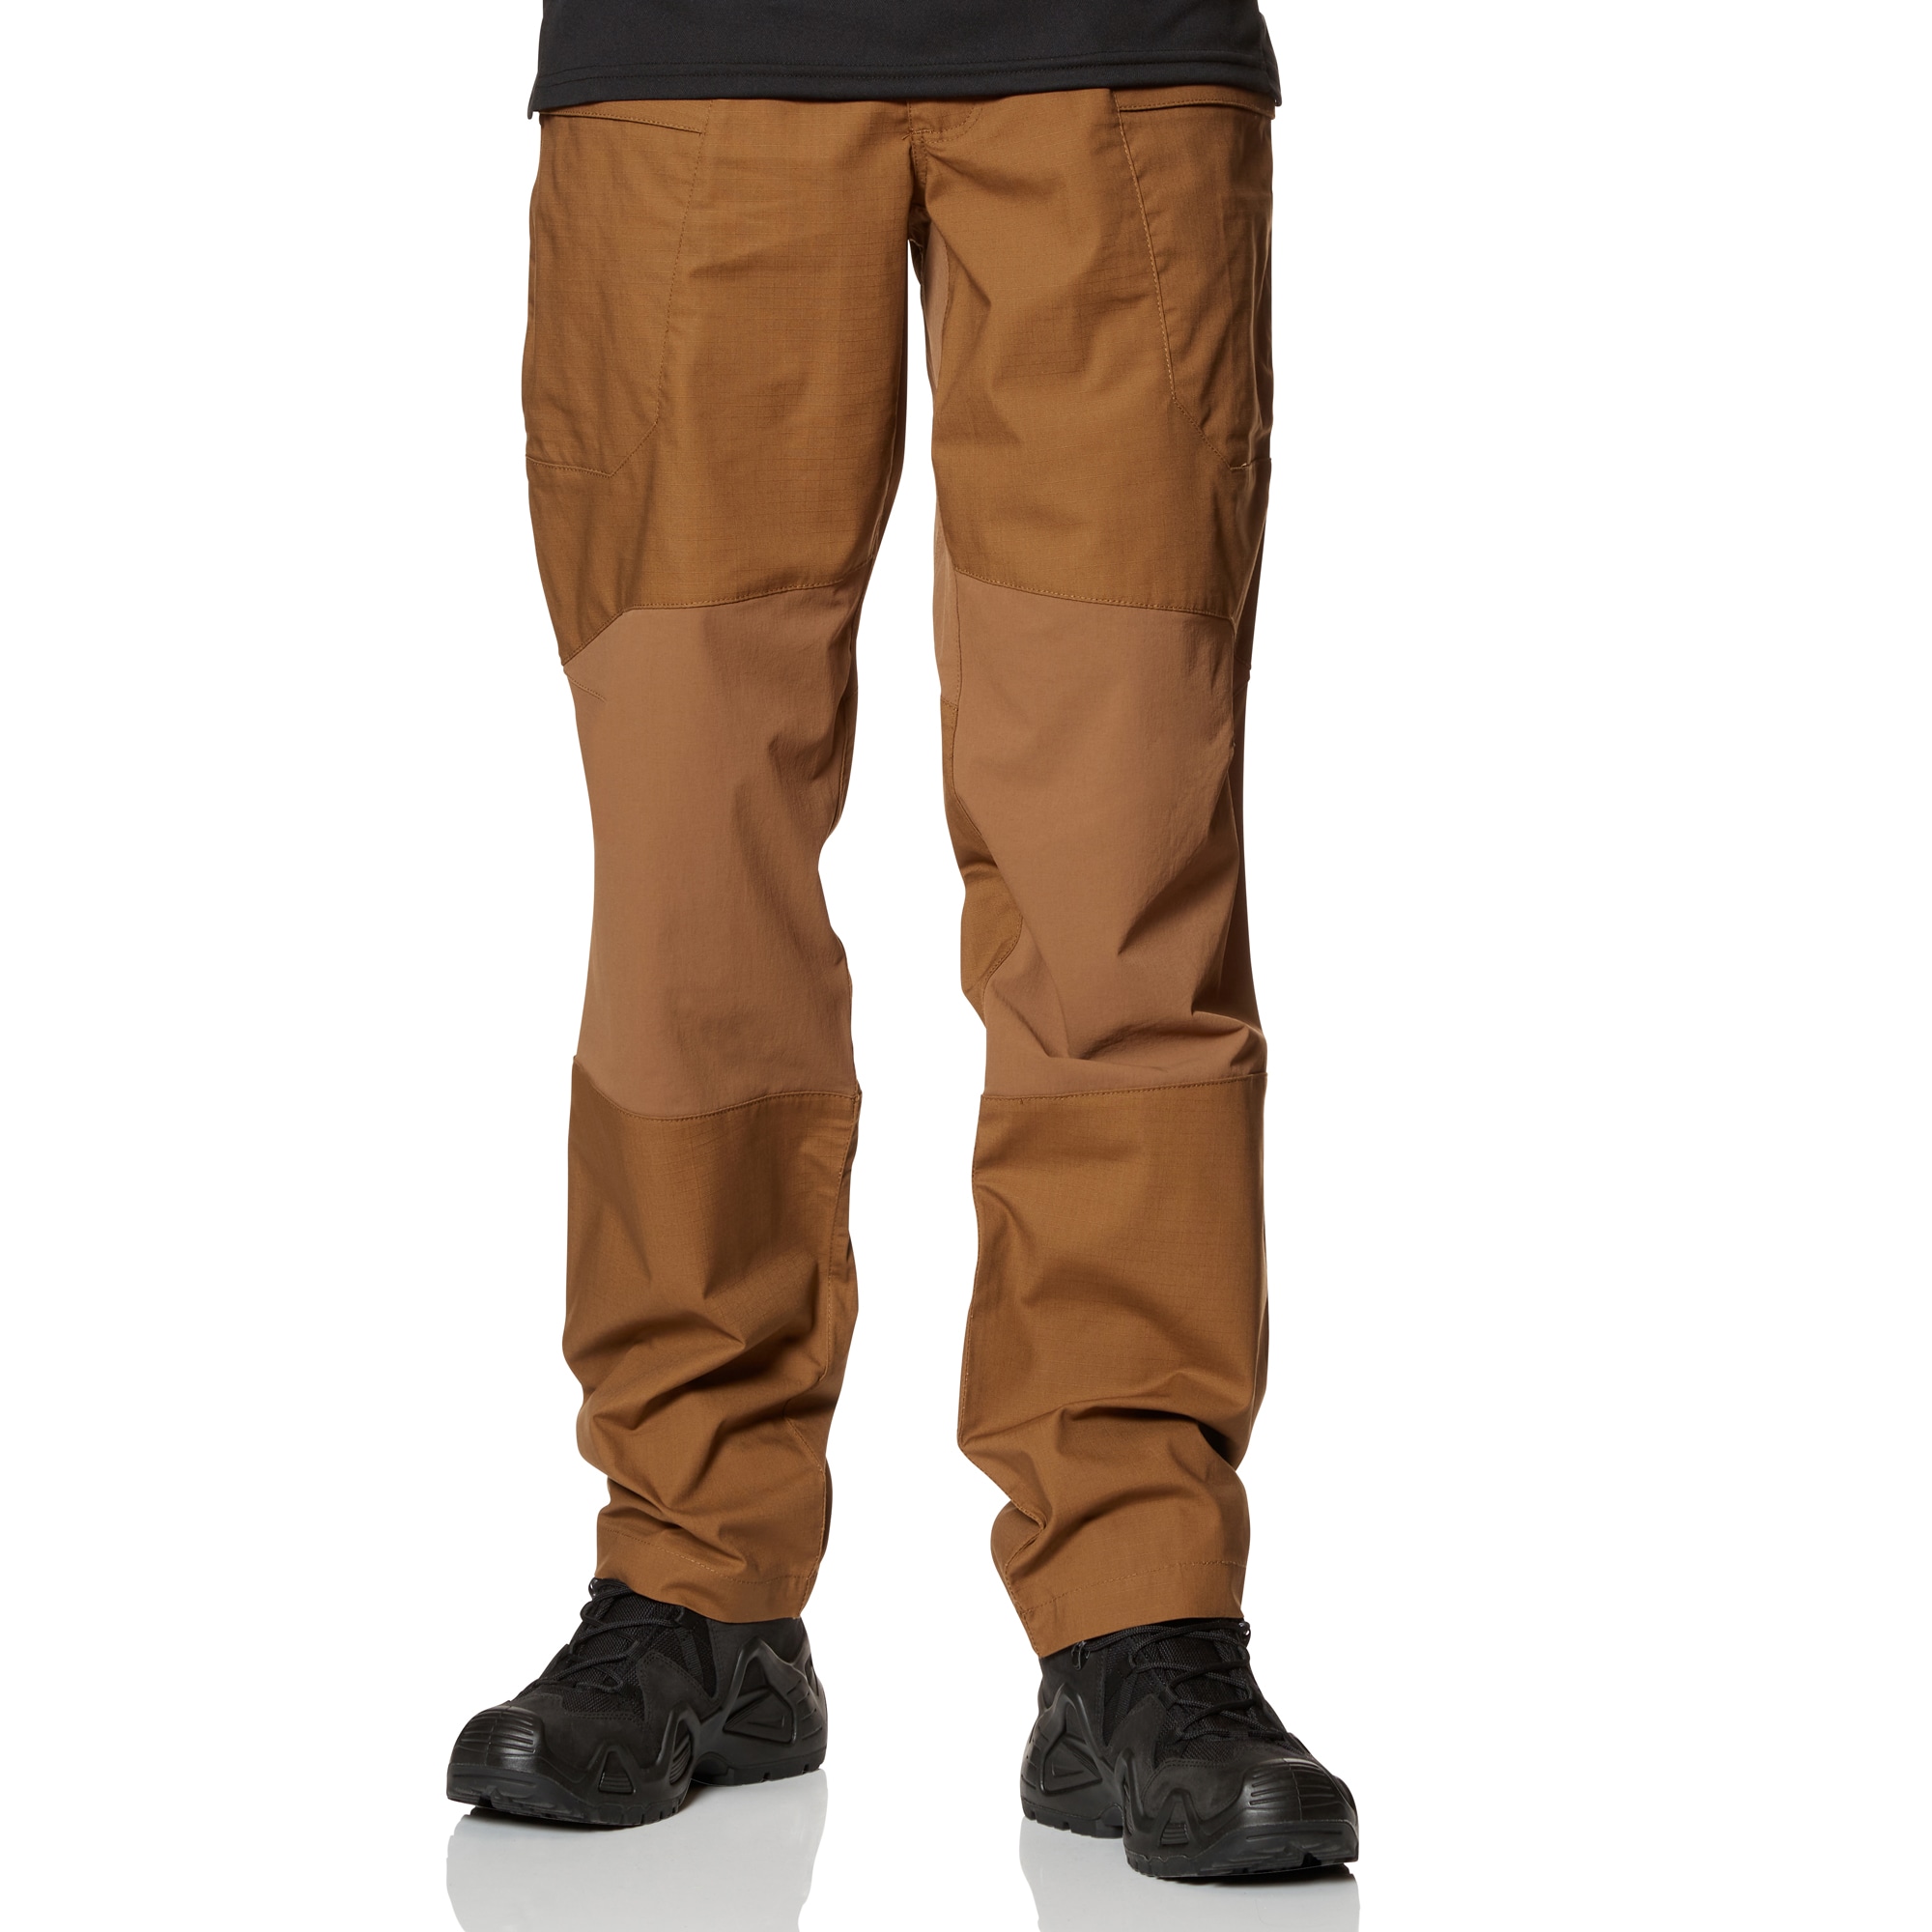 Purchase the Helikon-Tex Hybrid Tactical Pants mud brown by ASMC